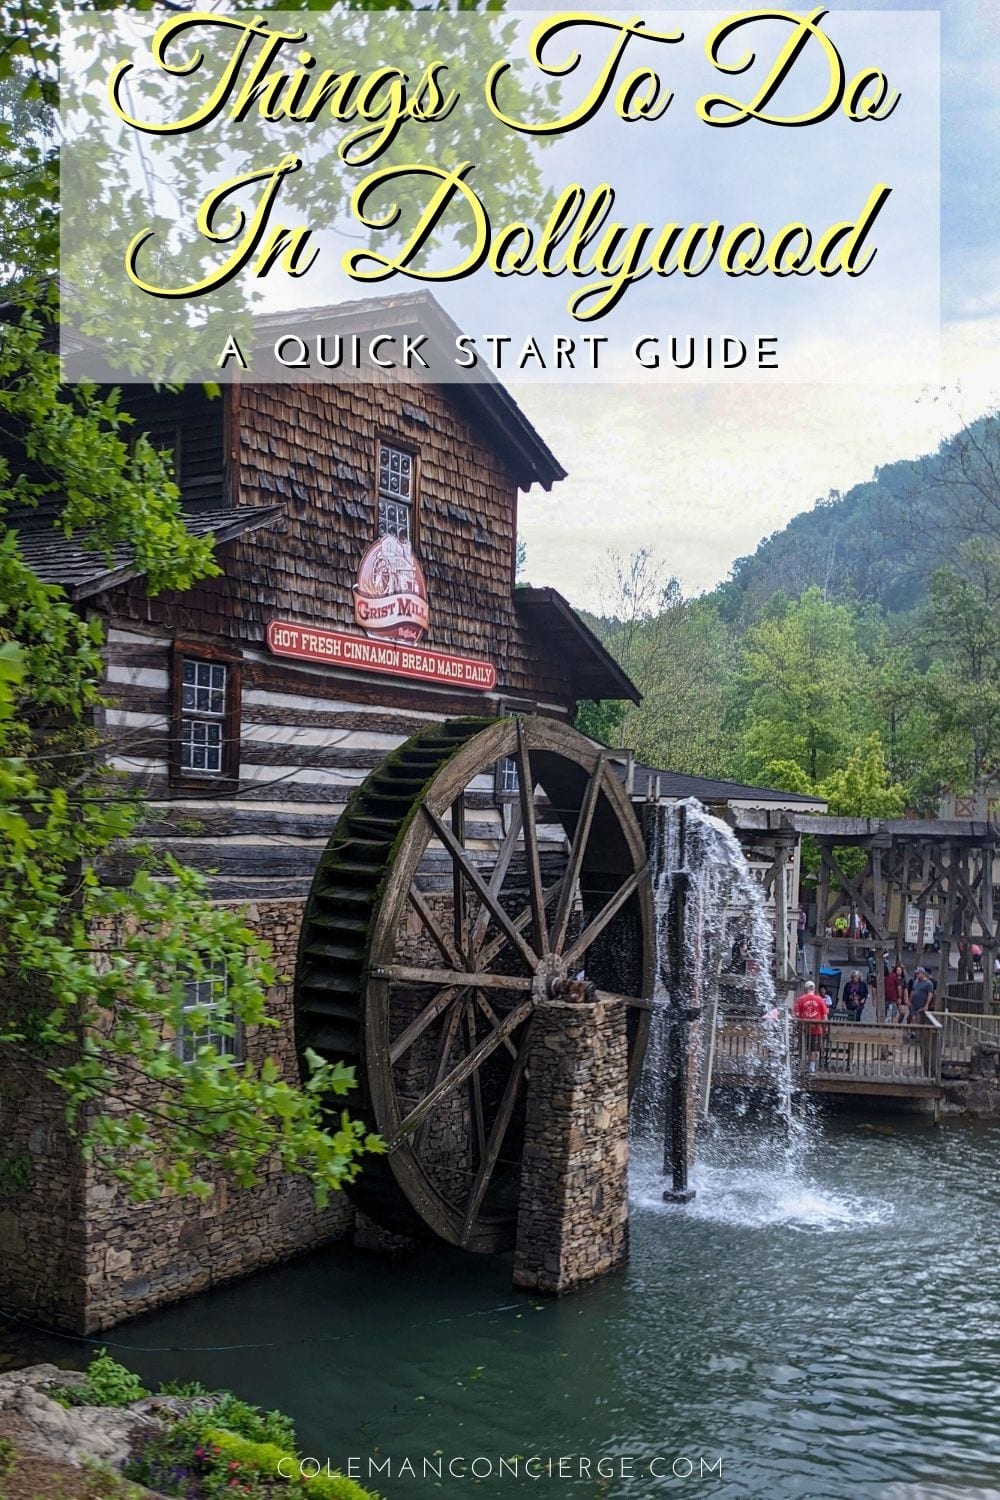 Image of the Grist Mill in Dollywood